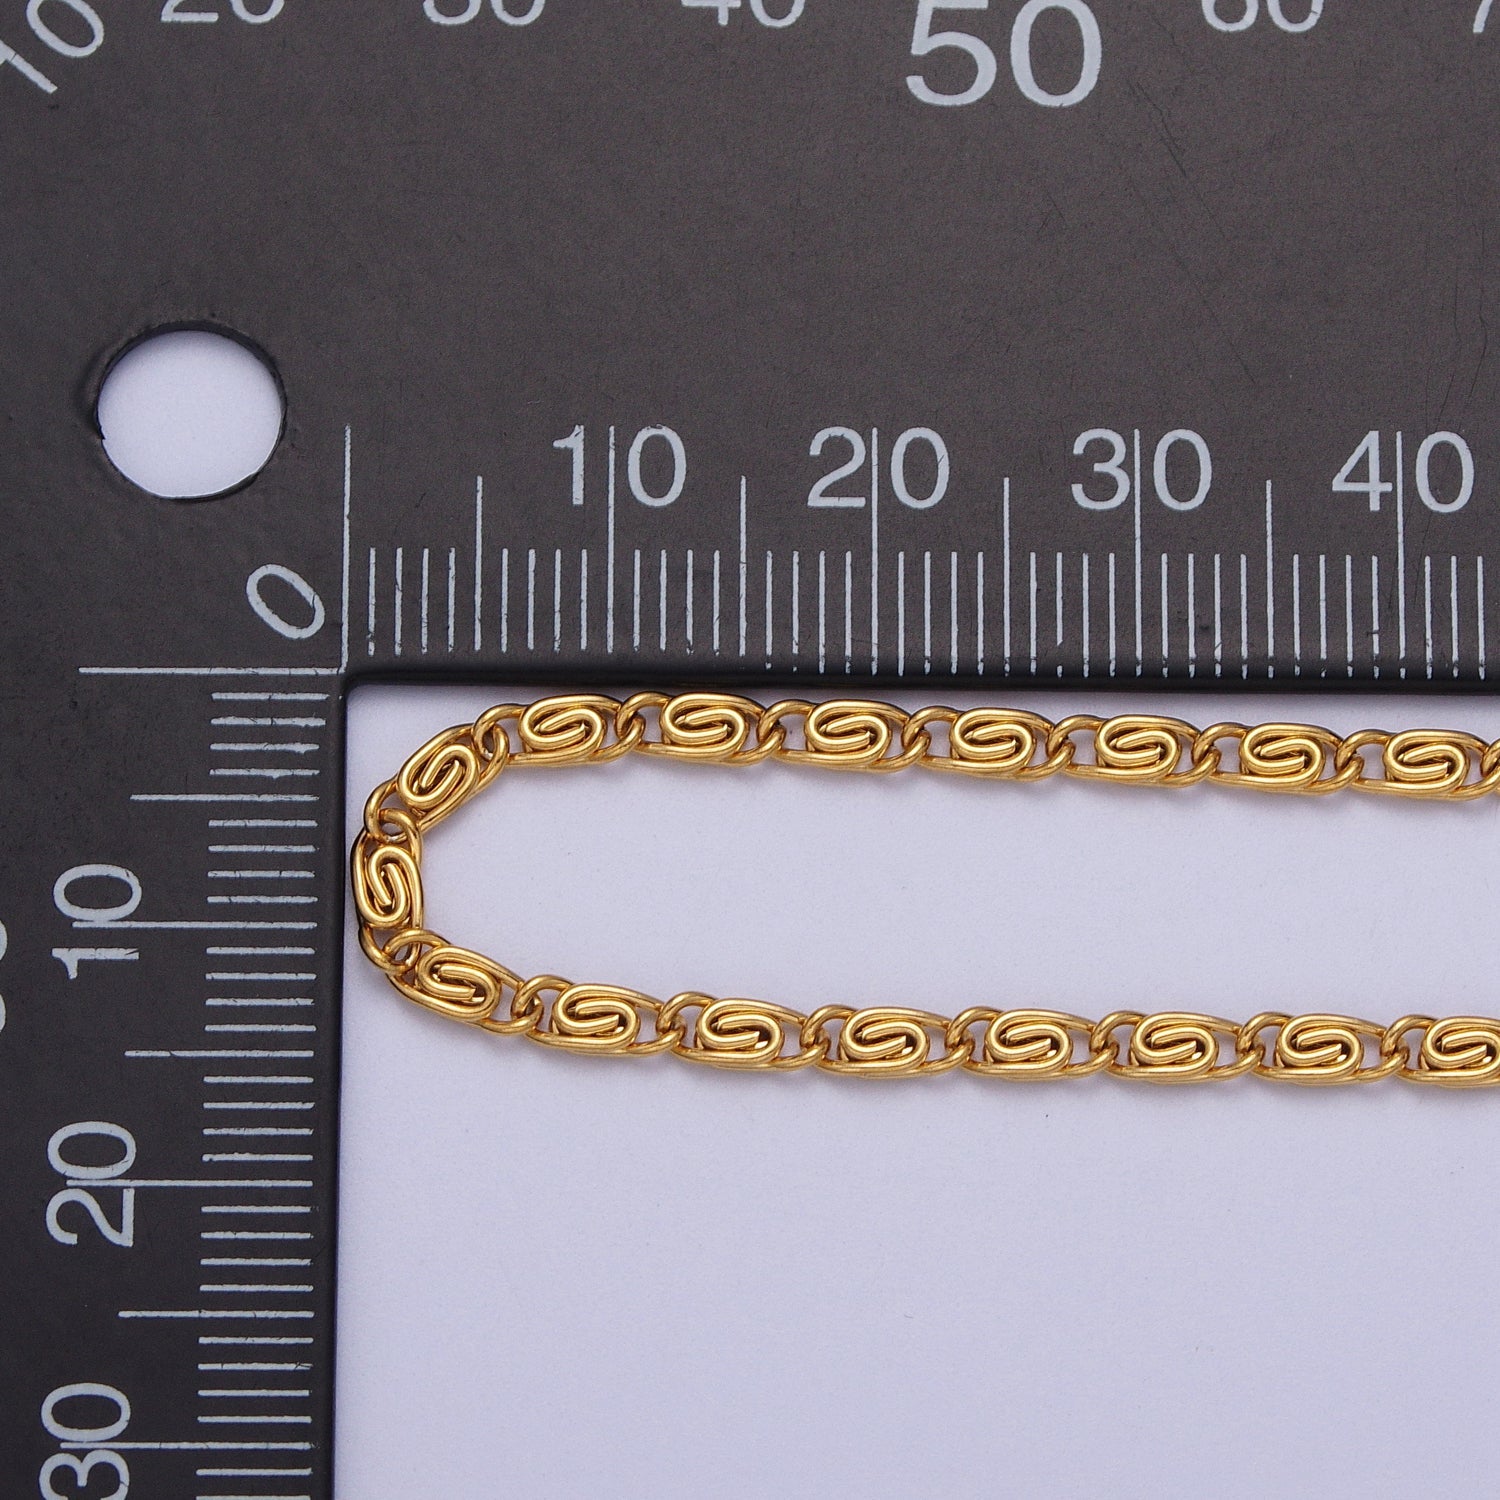 Gold Filled 2.6mm Gold & Silver Scroll Chain in 16, 18, 20 Inch Length Necklace | WA-1486, WA-1482, WA-1488 - DLUXCA